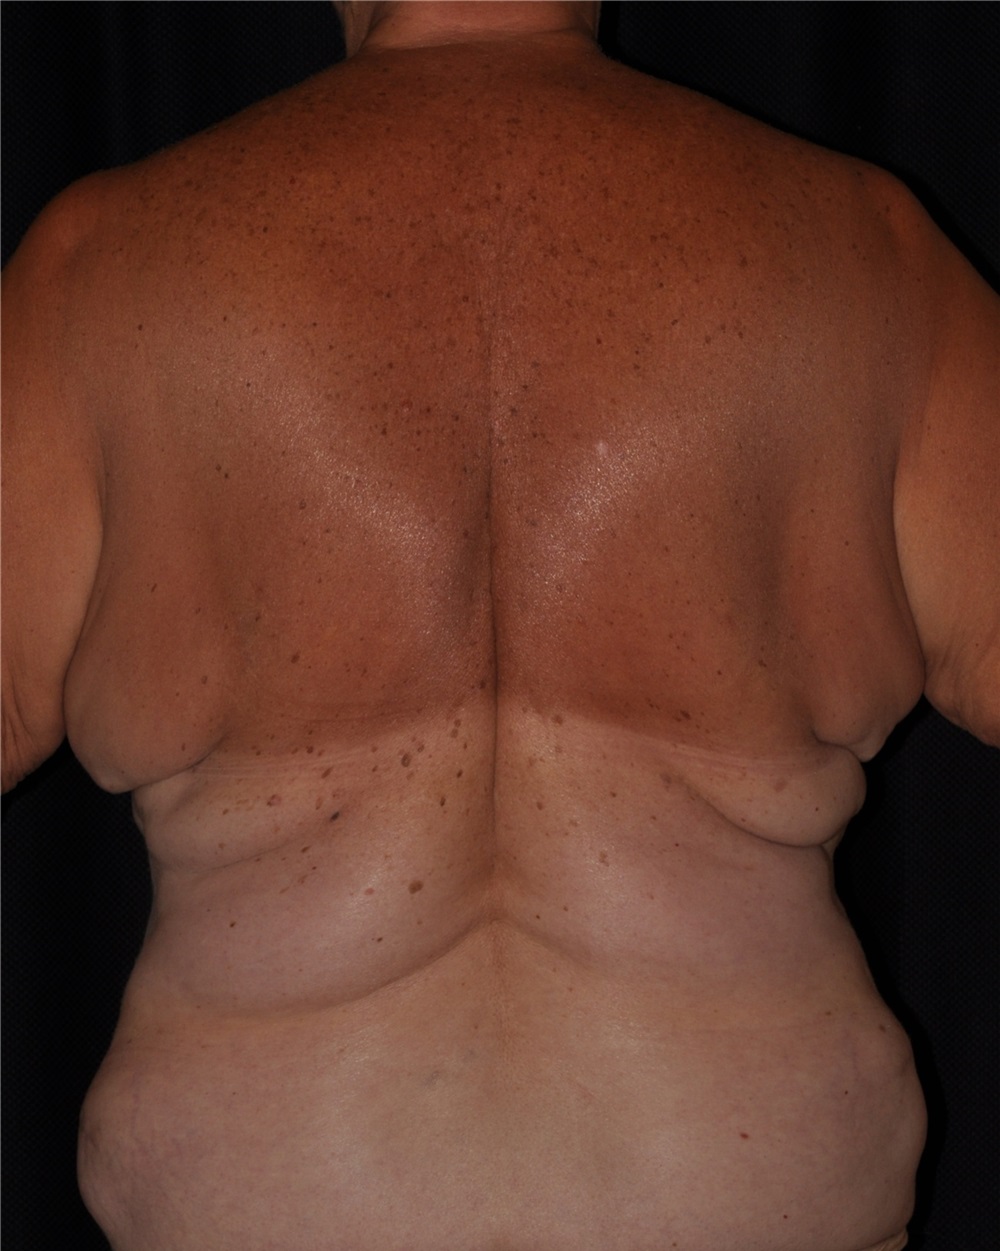 https://www1.plasticsurgery.org/include/images/photogallery/cases/112749/35889-103136b_AM.jpg